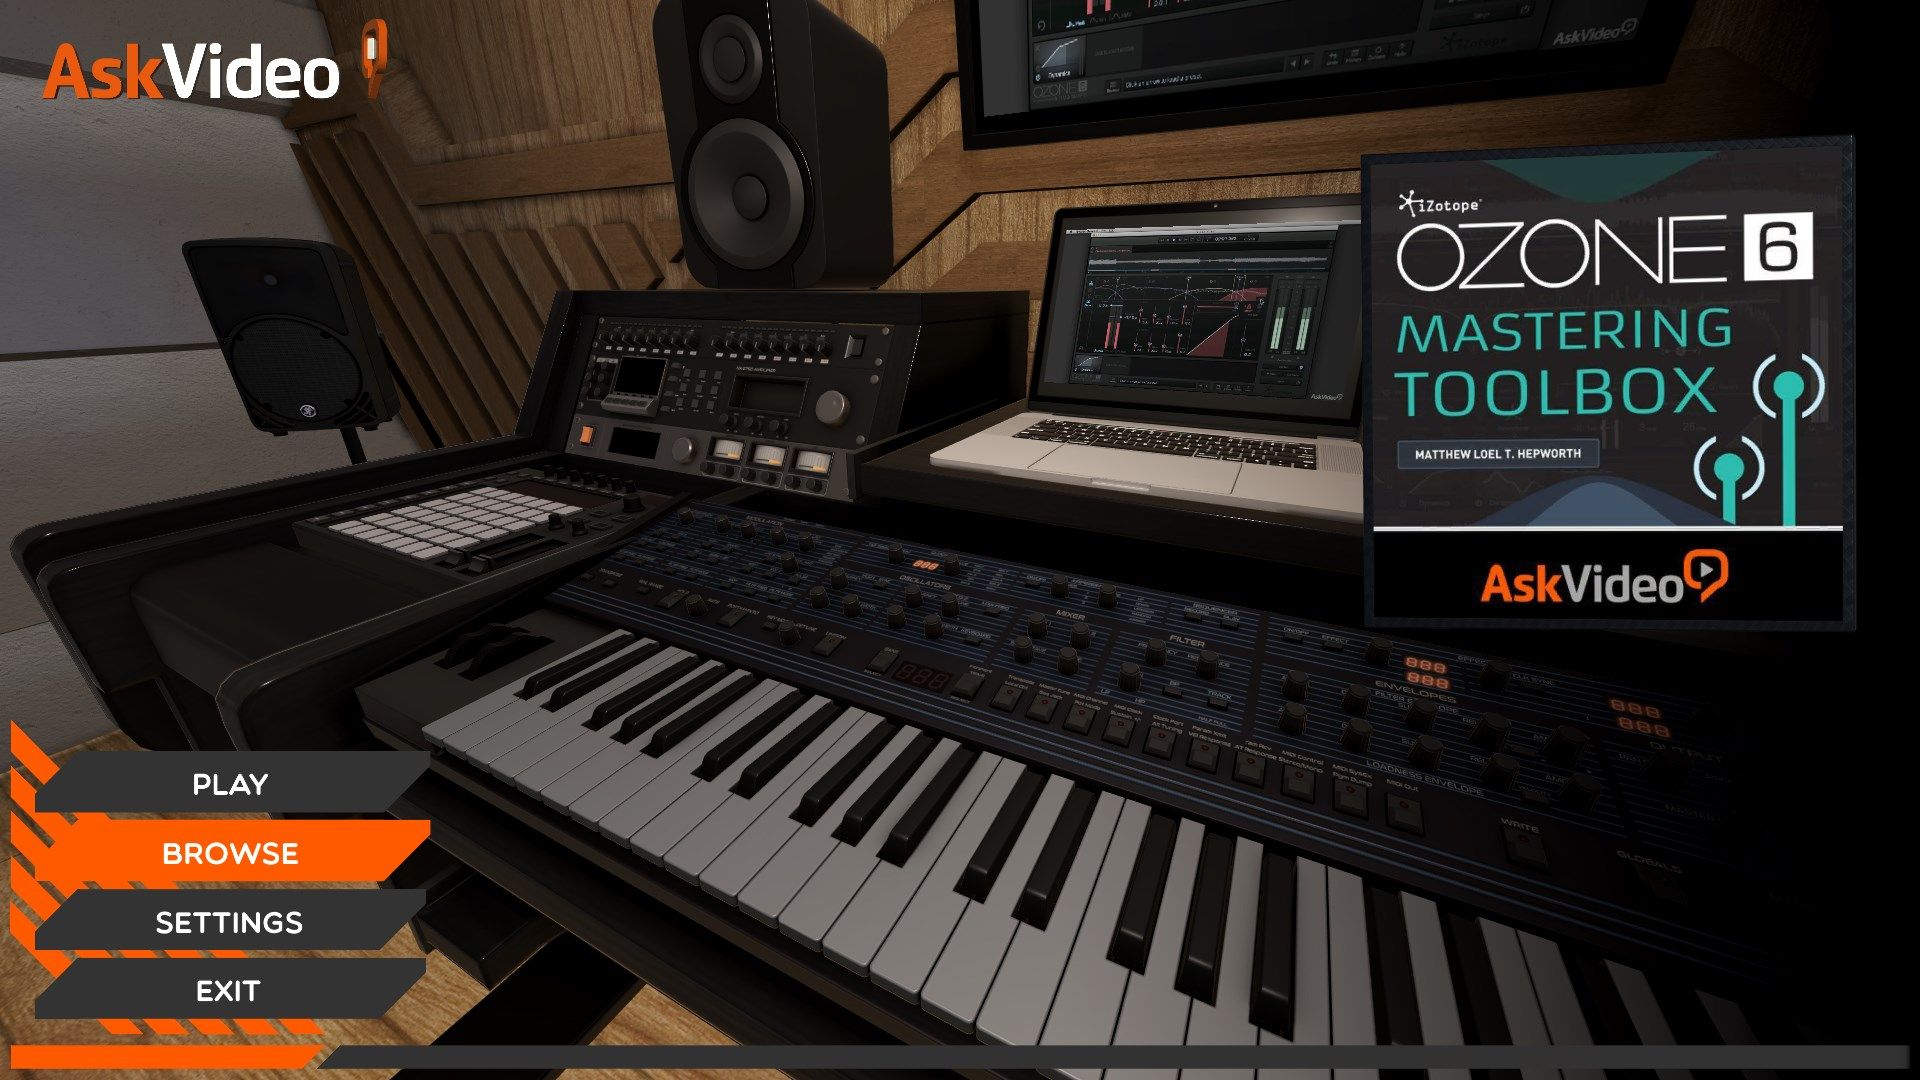 Mastering Toolbox Course For Ozone 6